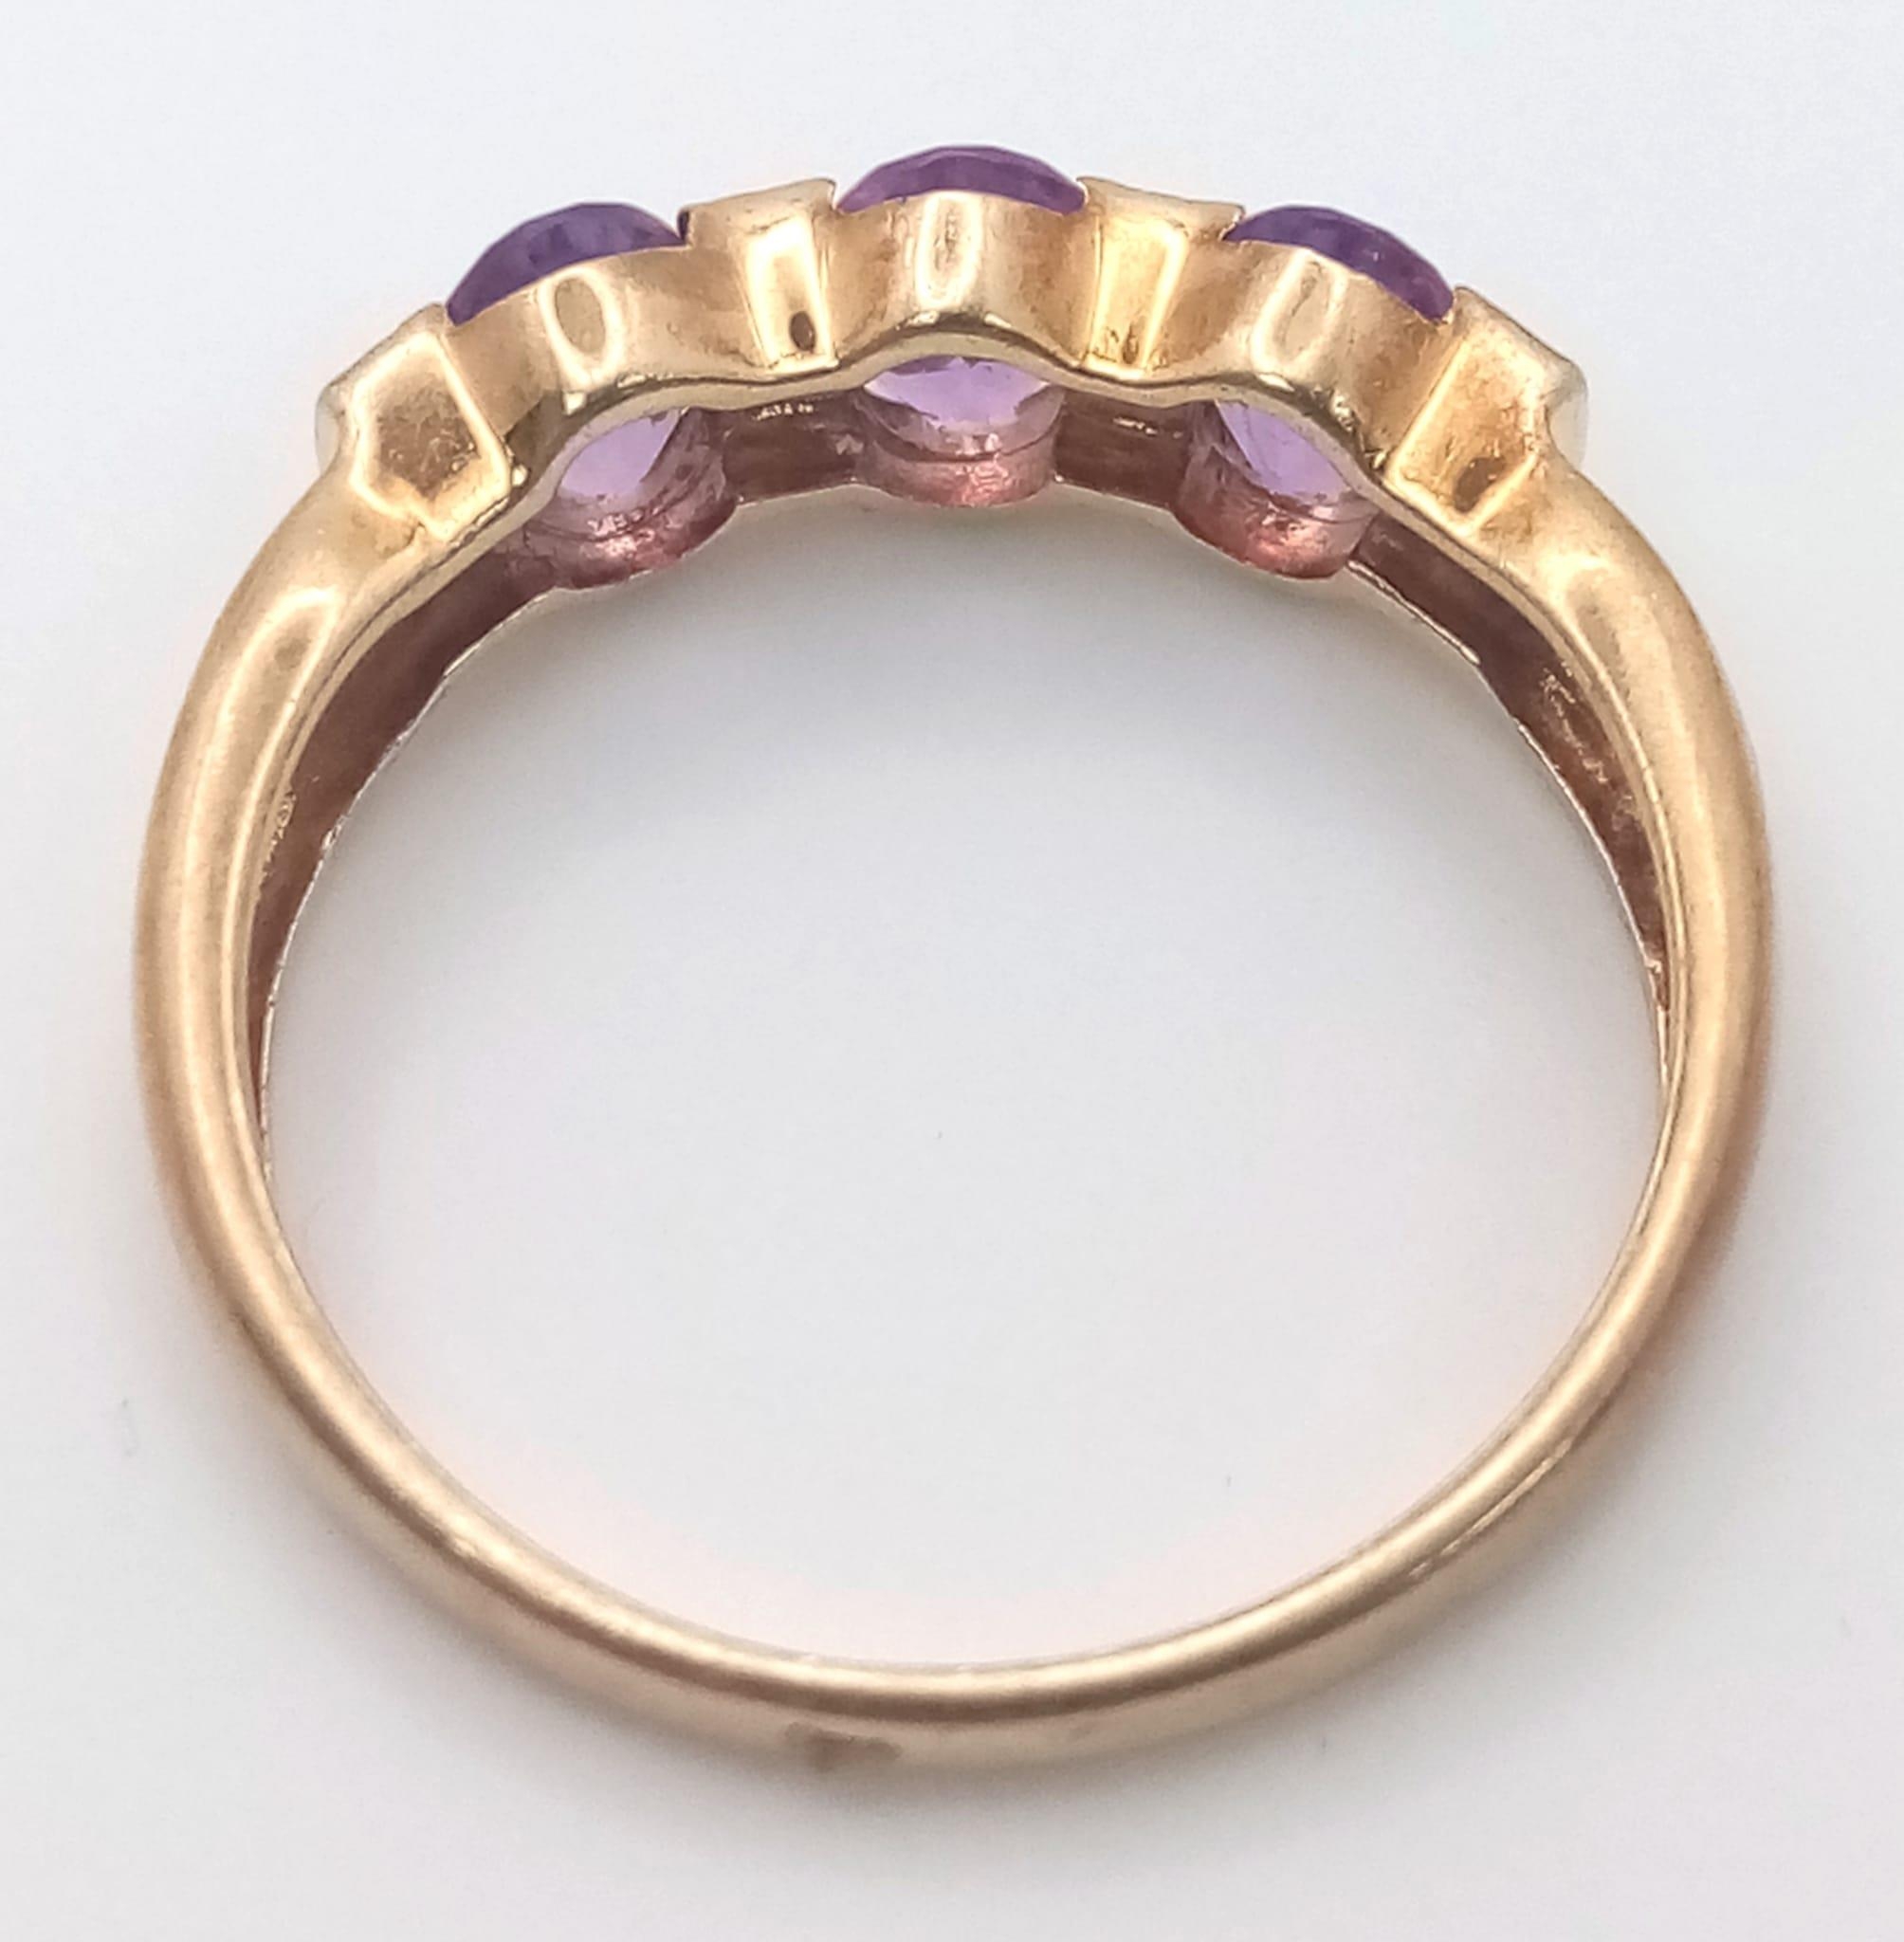 A 9K Yellow Gold Diamond and Amethyst Ring. Size P, 2.5g total weight. Ref: SC 7067 - Image 3 of 4